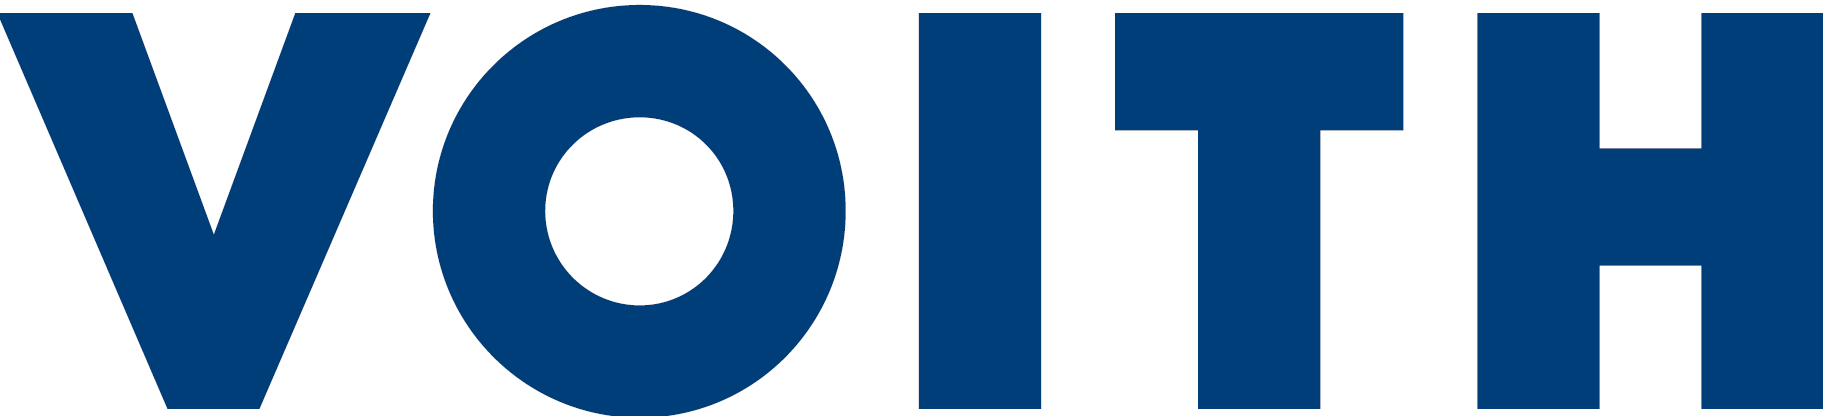 Voith logo.PNG